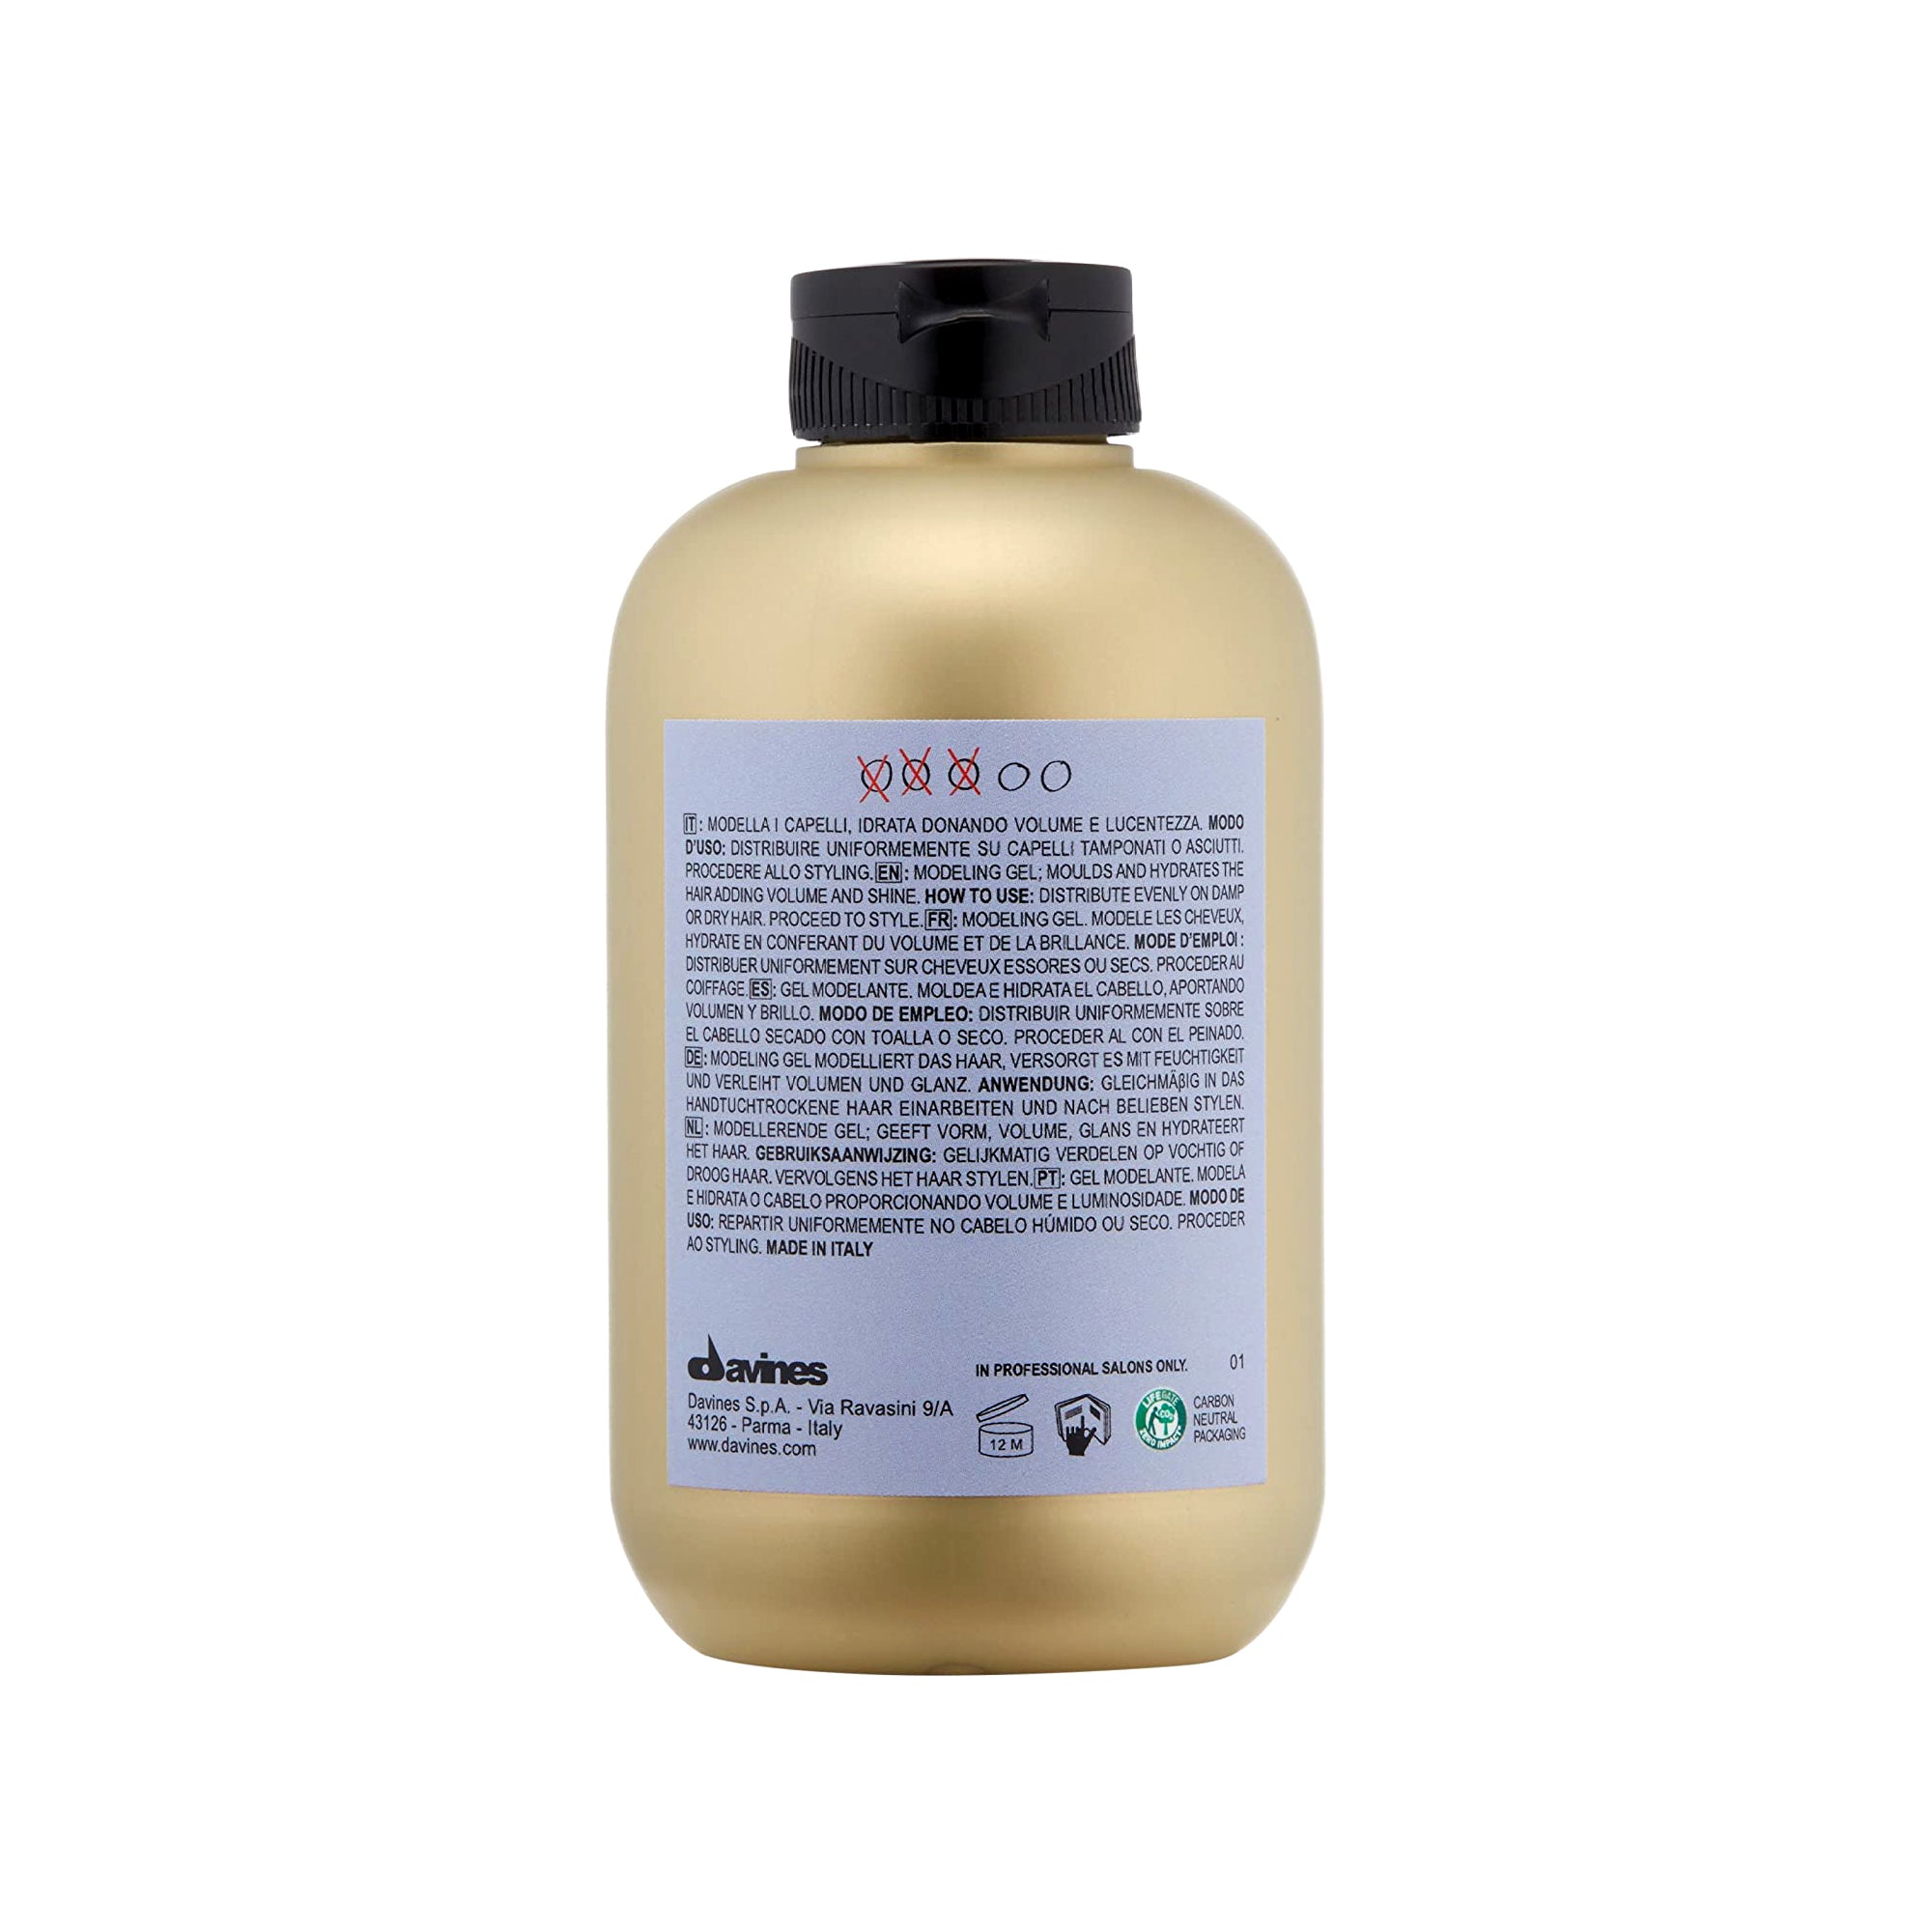 Davines This is a Medium Hold Modeling Gel / 8OZ